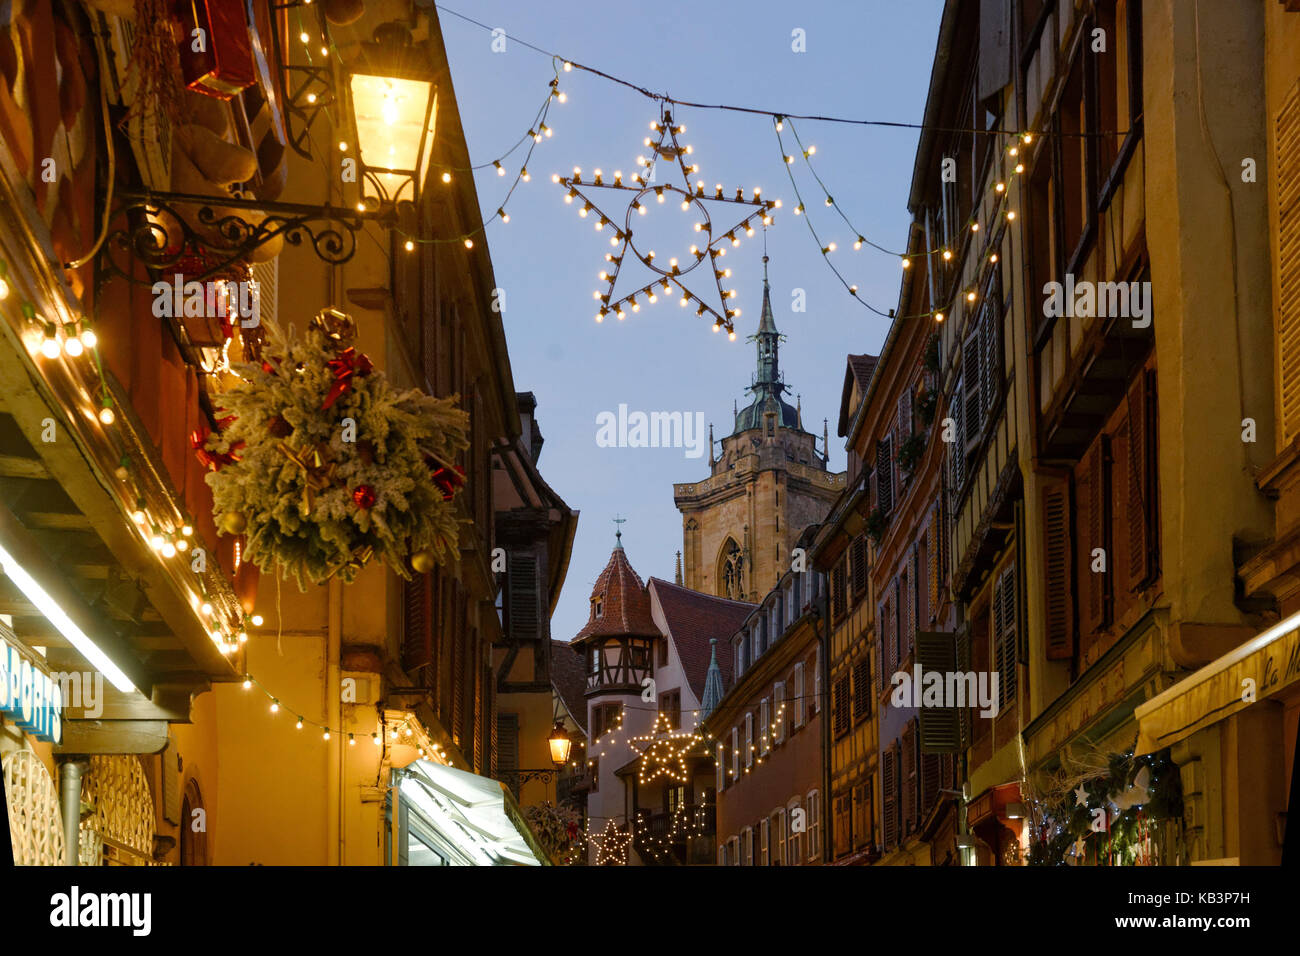 France, Haut Rhin, Colmar, Christmas decoration at Rue des Marchands, Maison Pfister and steeple of Saint Martin's Abbey Church Stock Photo